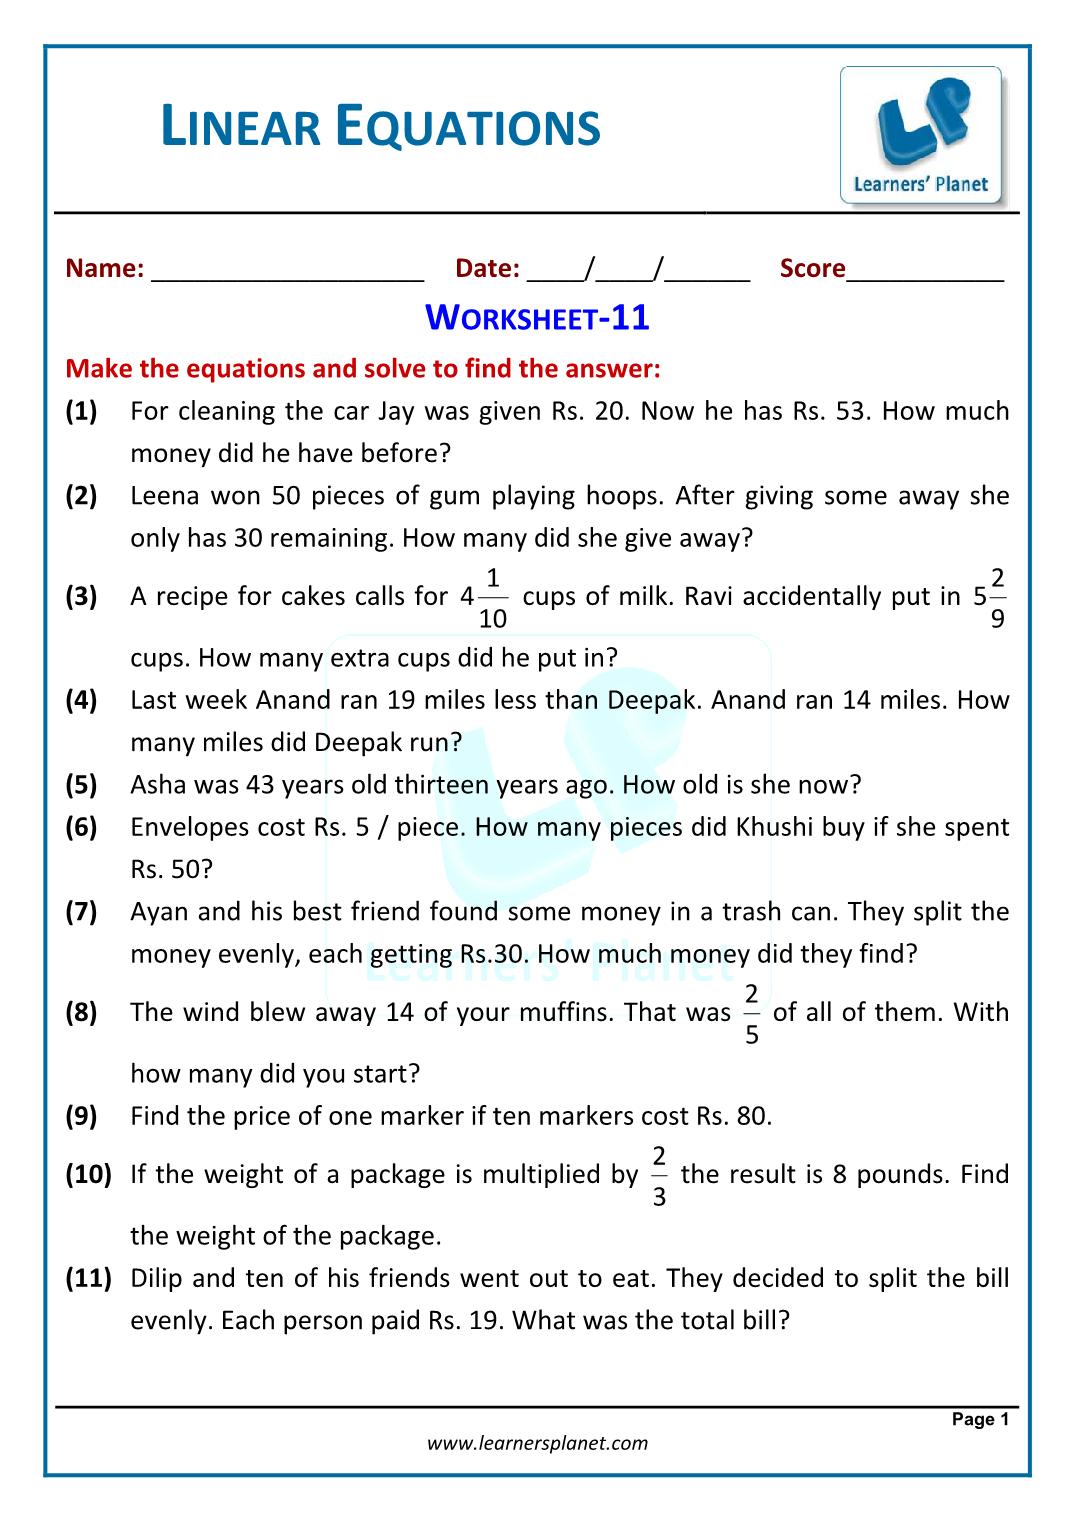 Linear Equations in One Variable For Linear Word Problems Worksheet